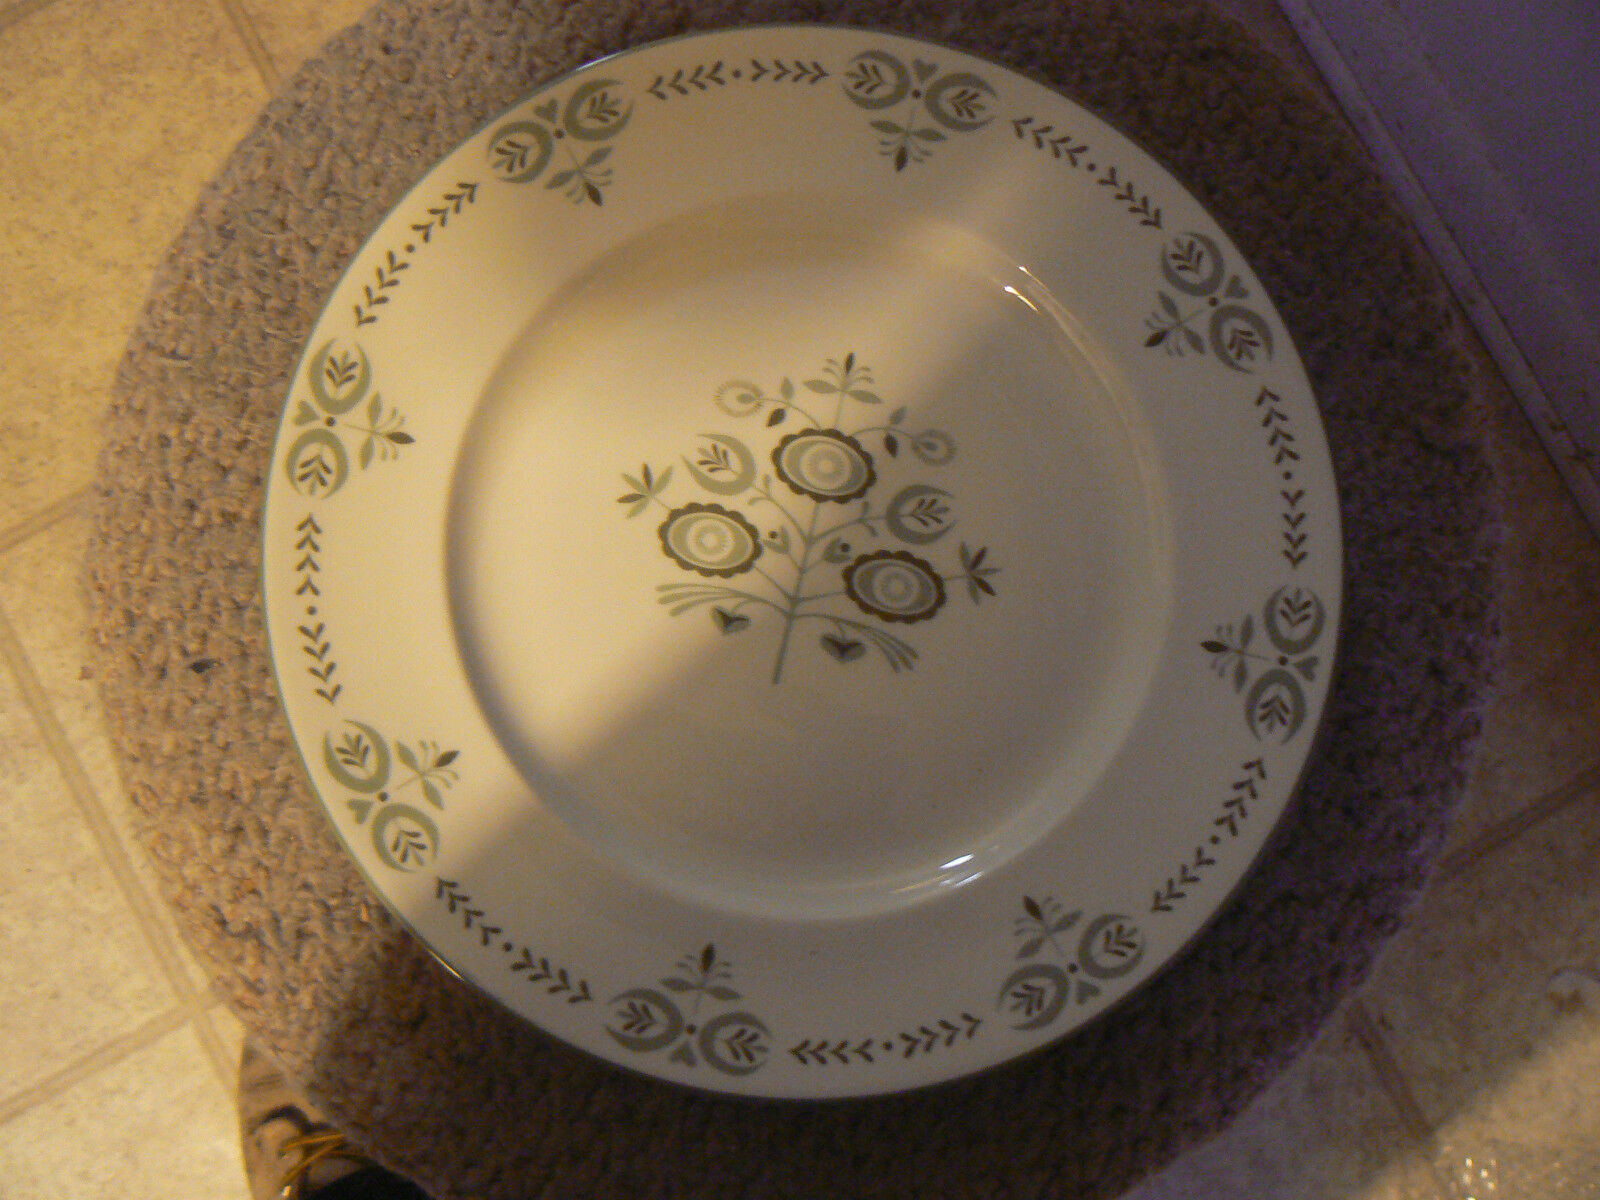 Franciscan Heritage dinner plate 13 available - $6.04